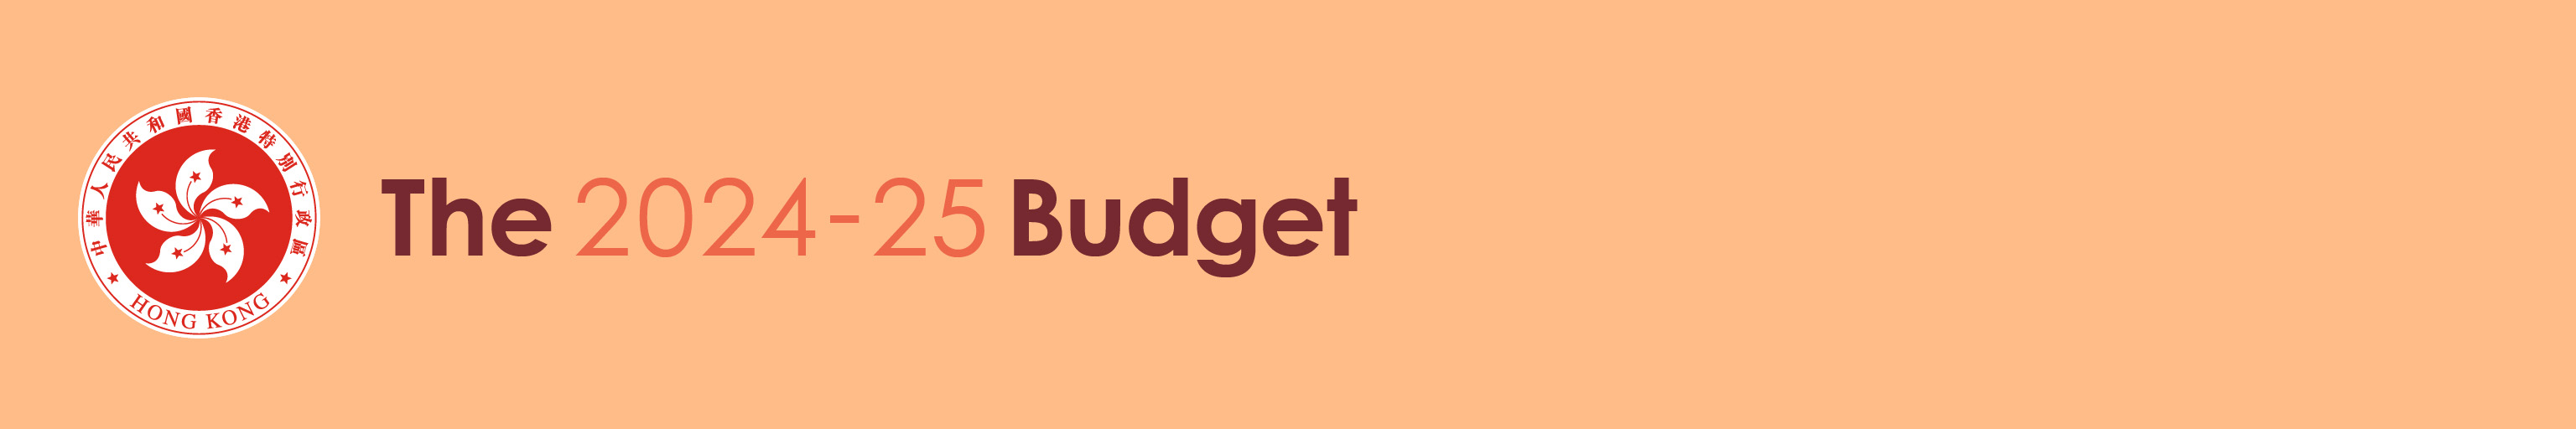 The 2024-25 Budget - Home